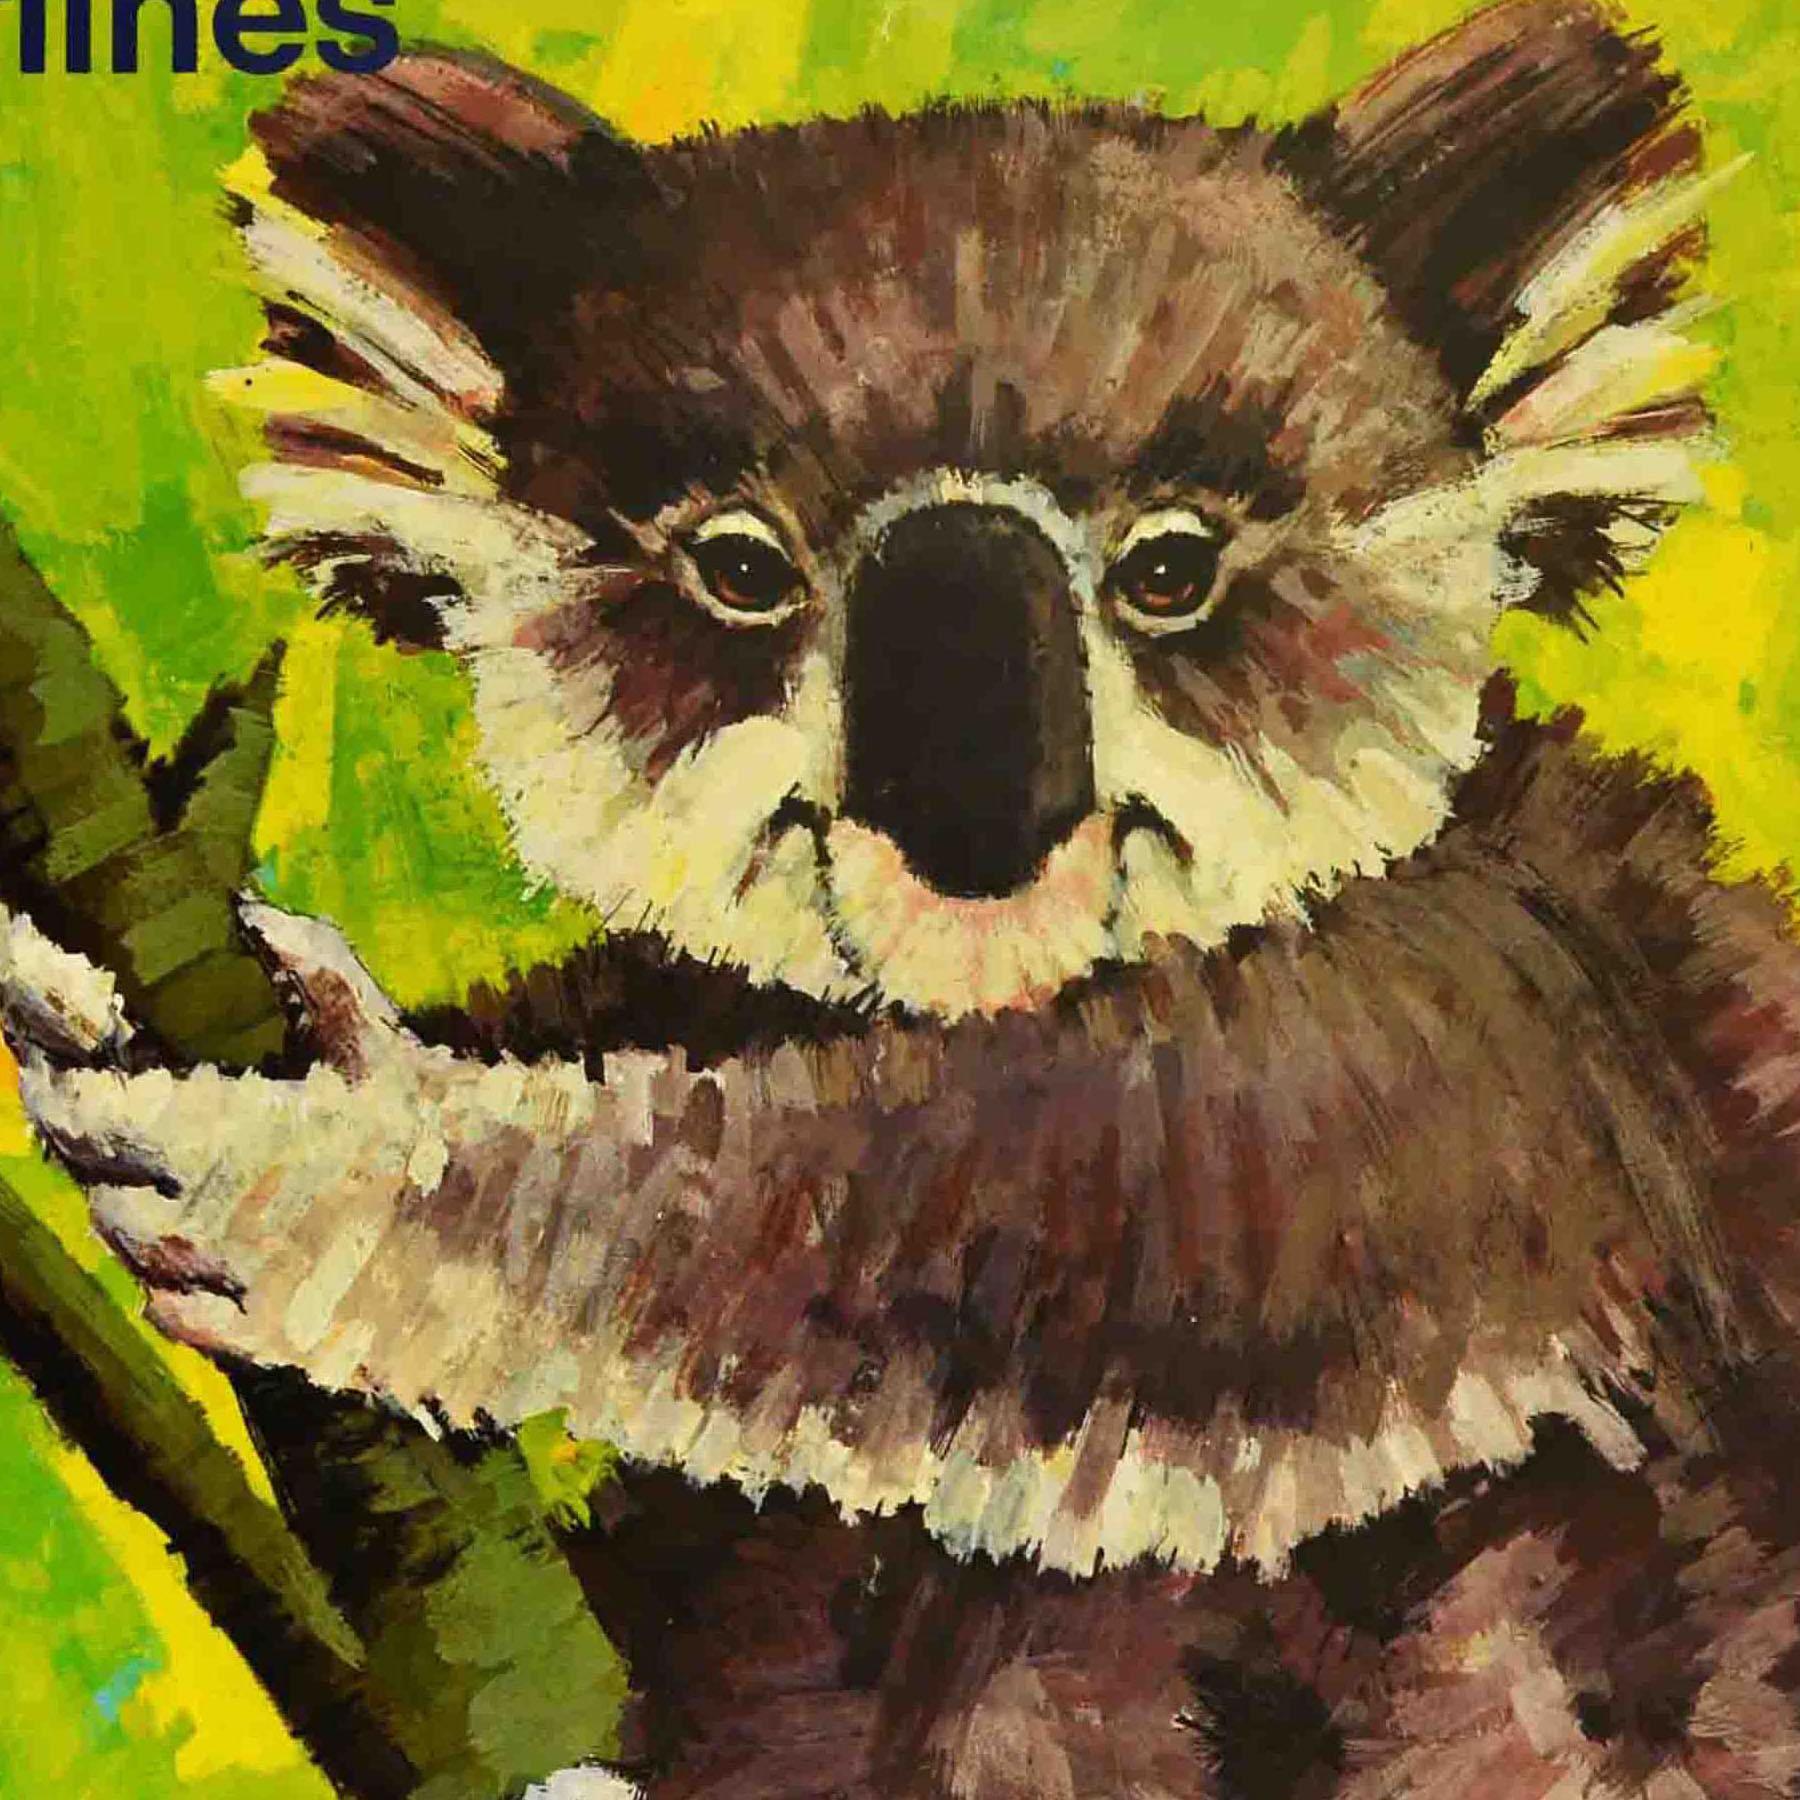 Original vintage travel poster - American Airlines Australia - featuring a great illustration of a koala bear in a tree looking at the viewer against a green shaded background. Good condition, creasing, staining, tears, small paper loss in bottom